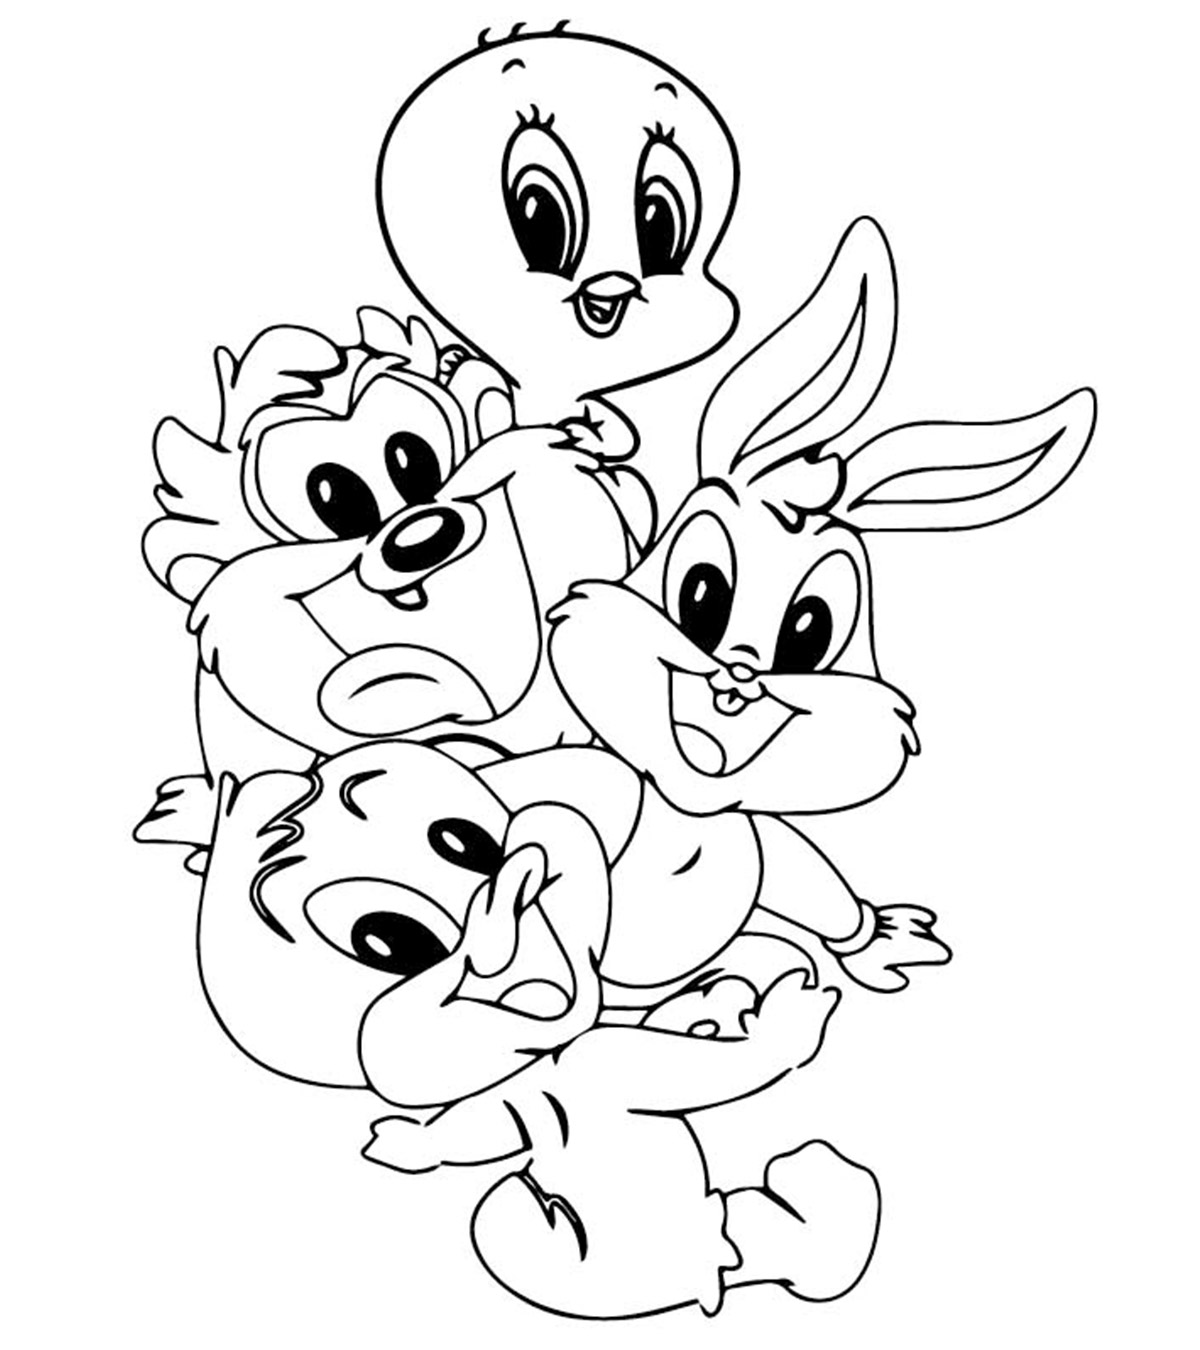 10 Lovely Tweety Bird Coloring Pages your Toddler Will Love_image